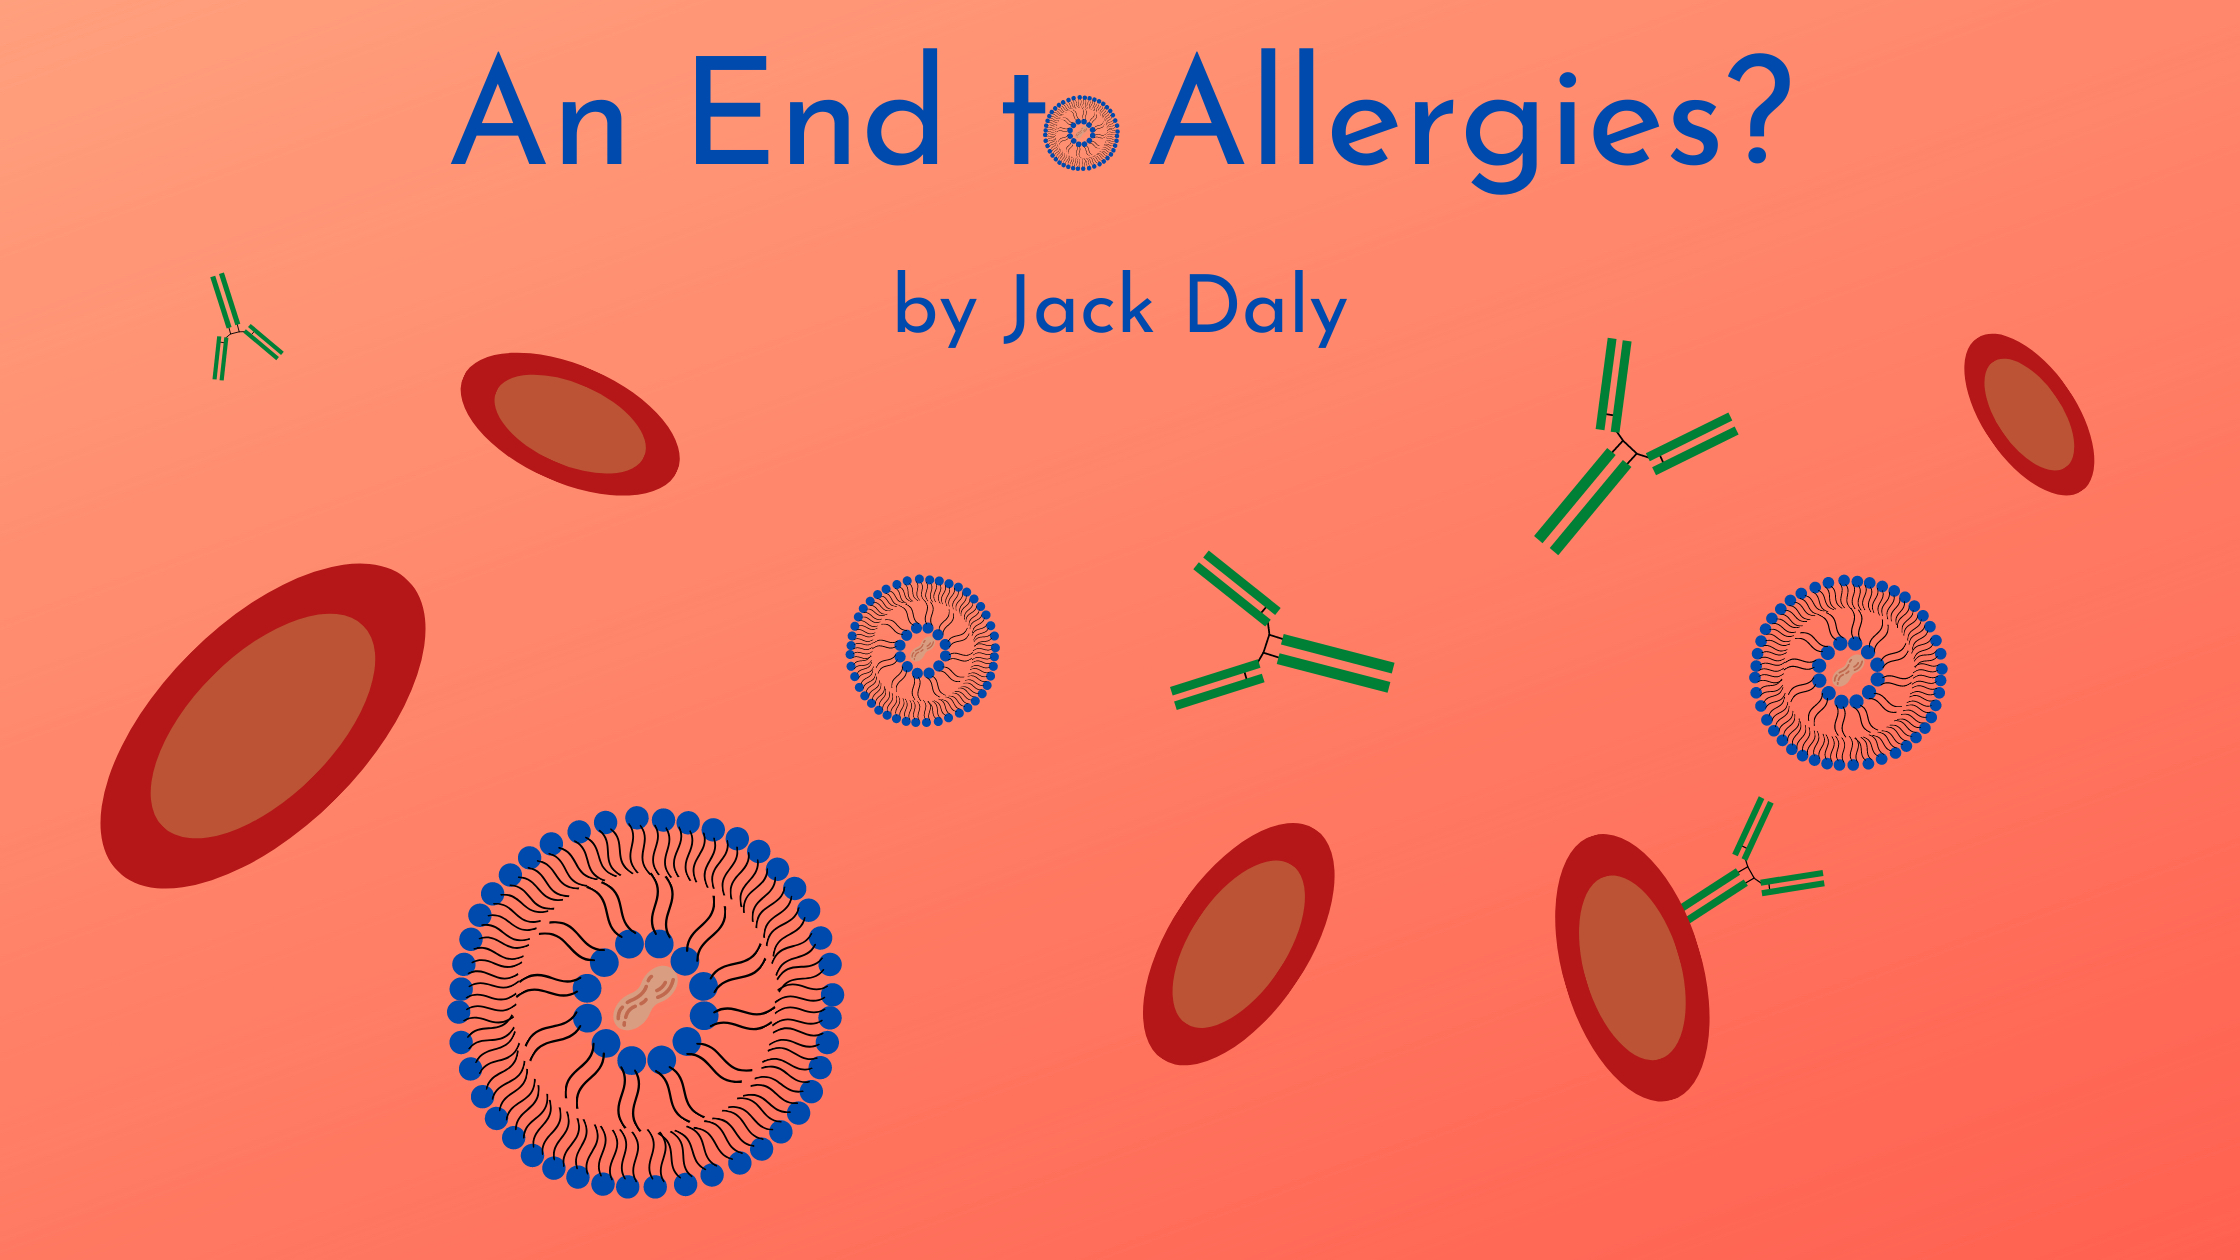 An End to Allergies?